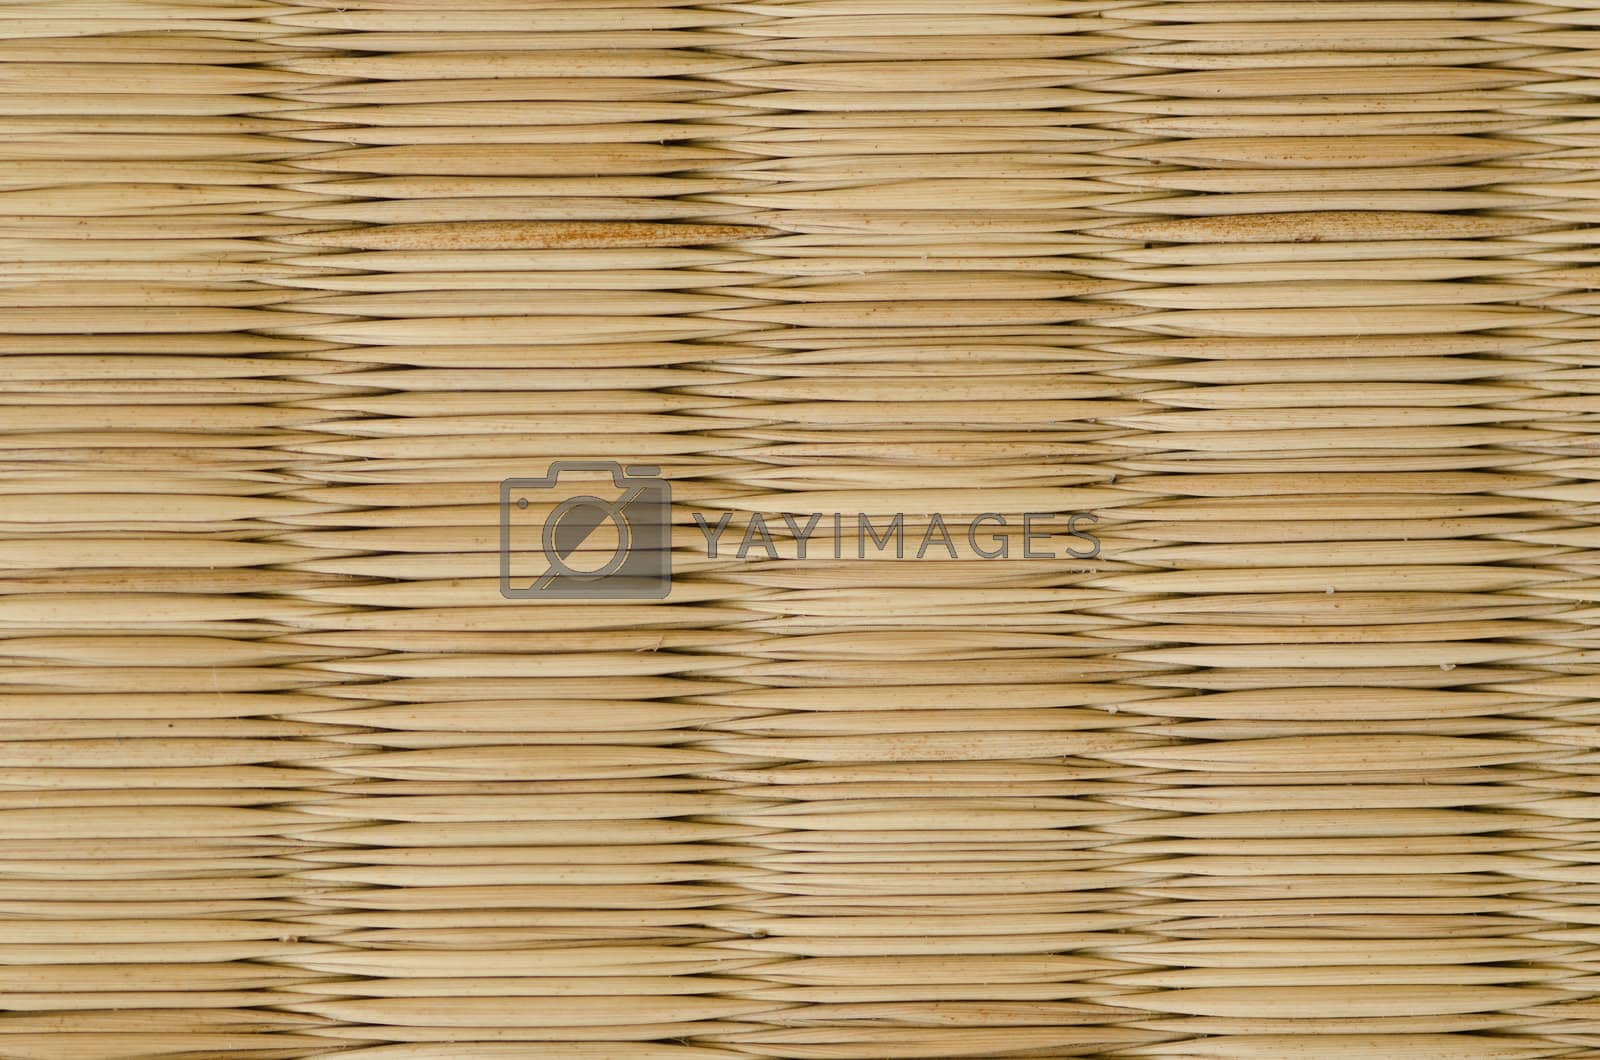 Royalty free image of Closeup of a tatami mat by Arrxxx